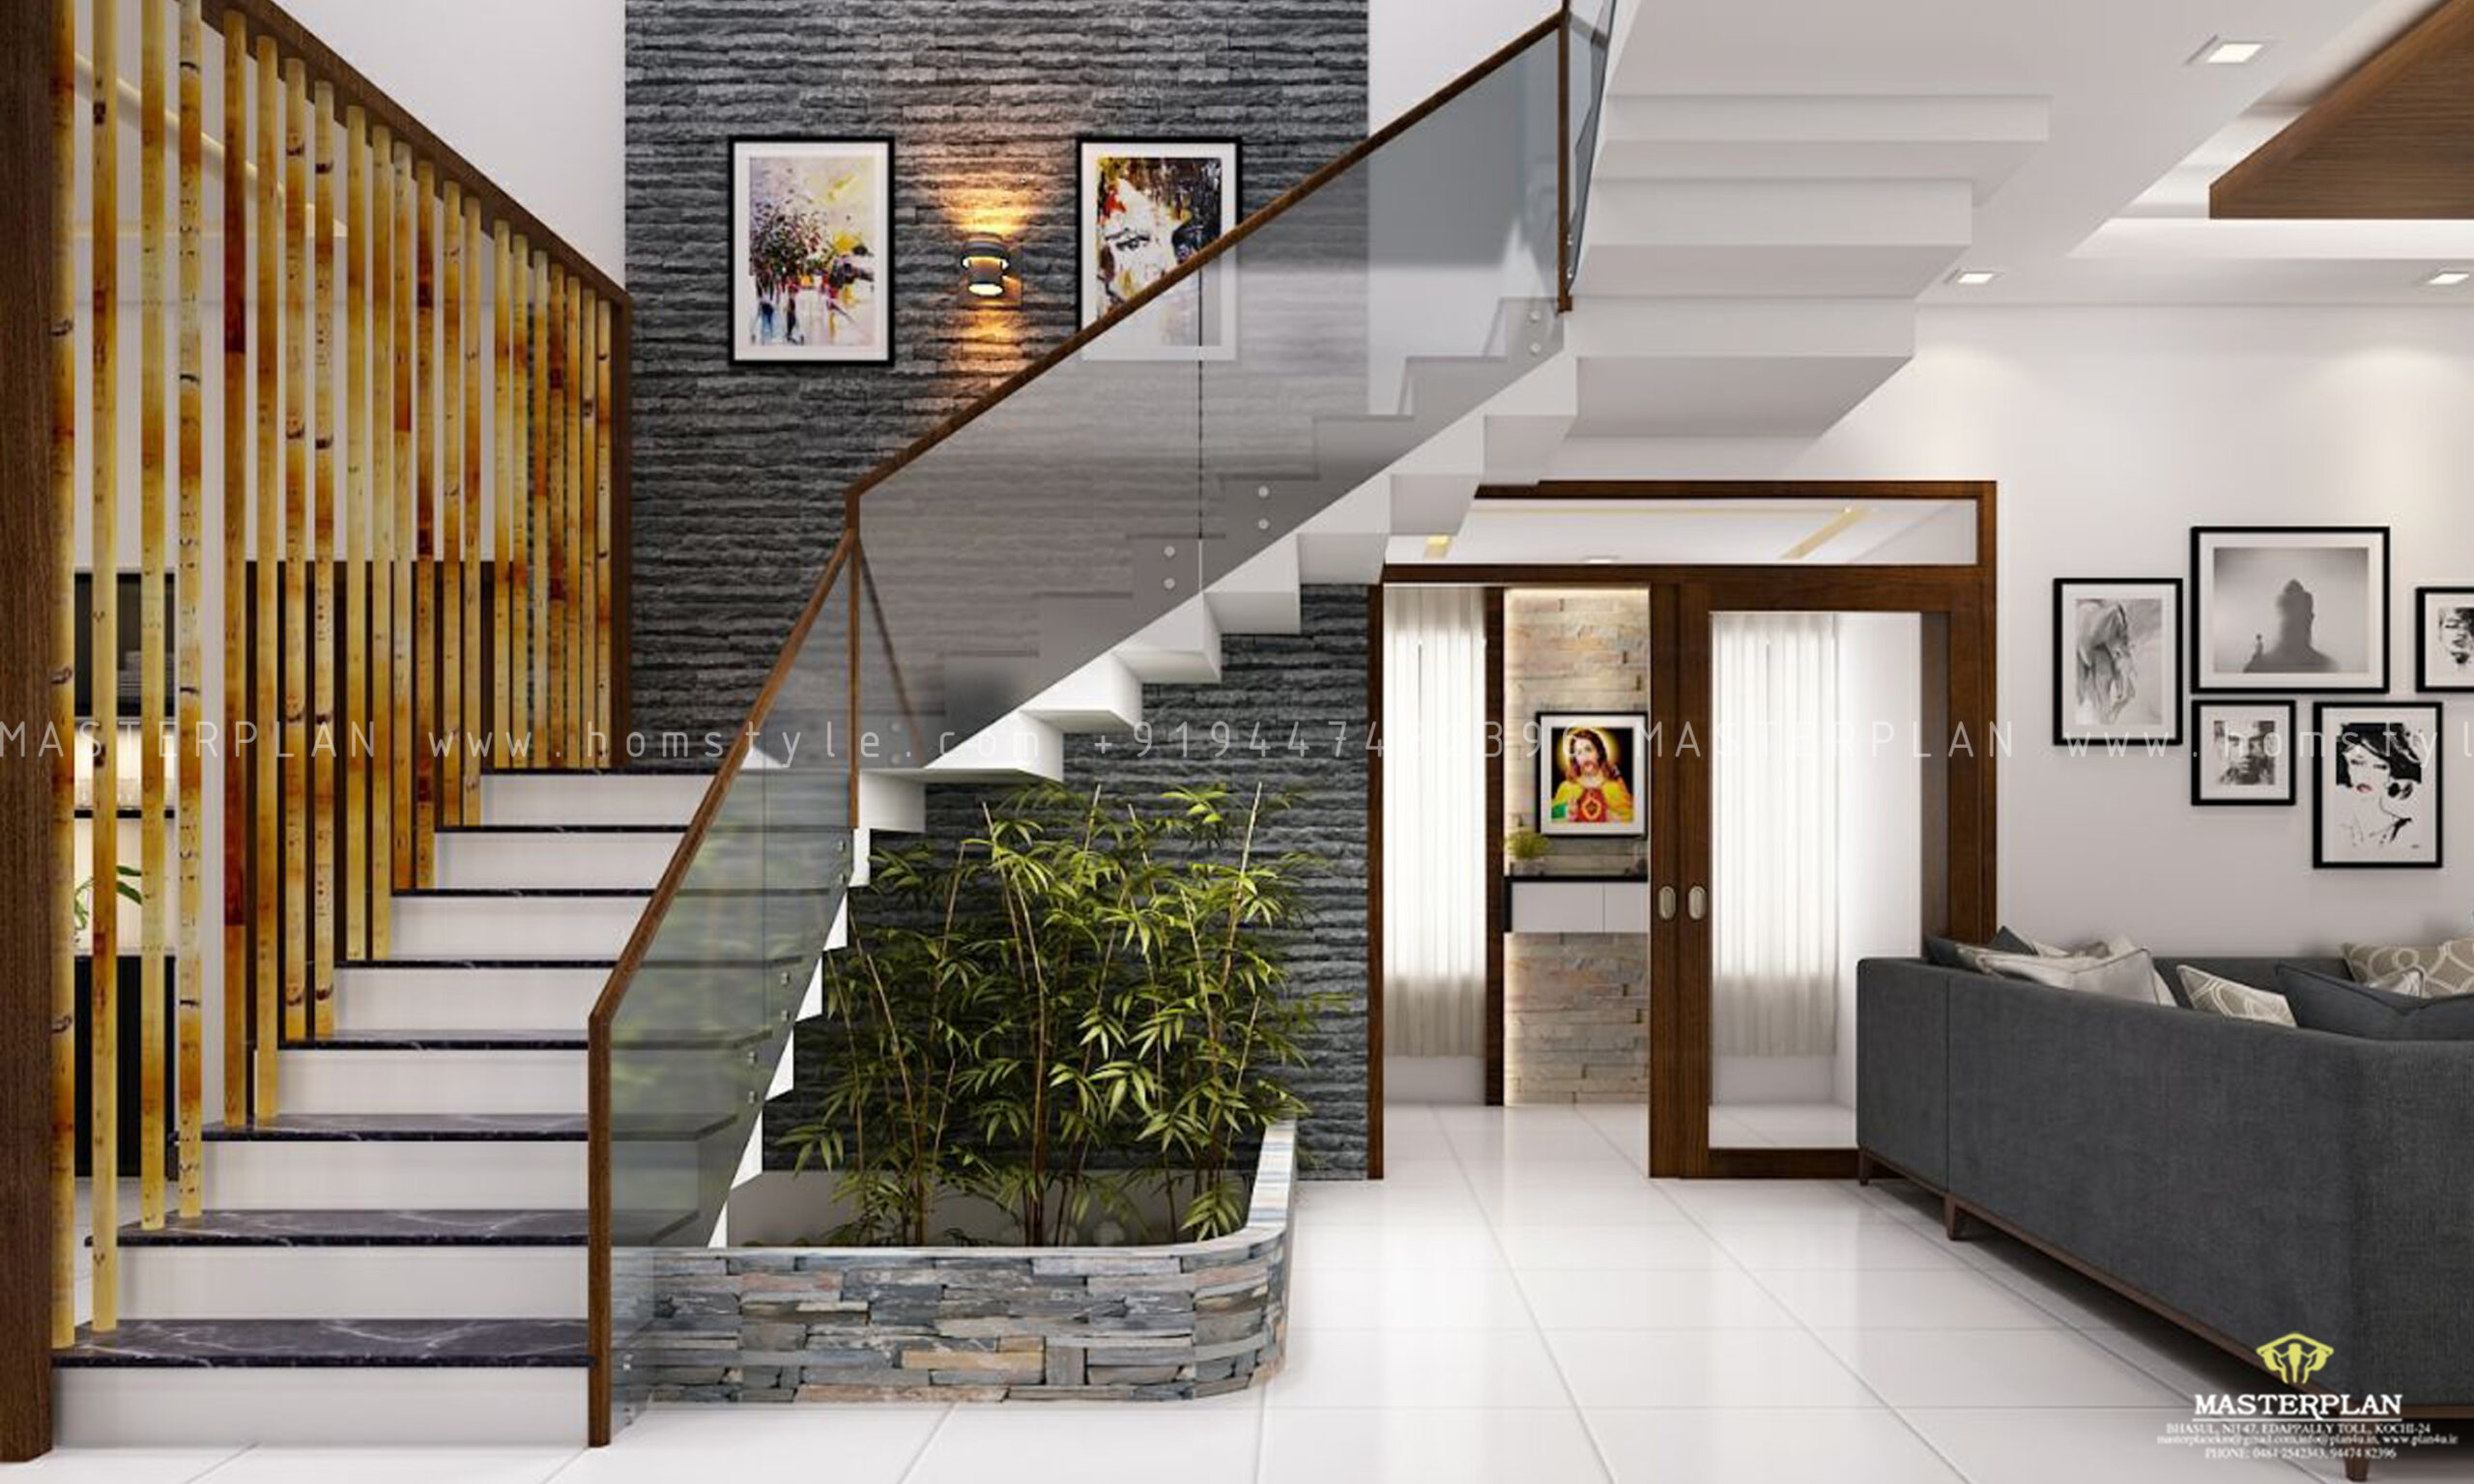 Stair 9 Kerala Home Design Scaled 